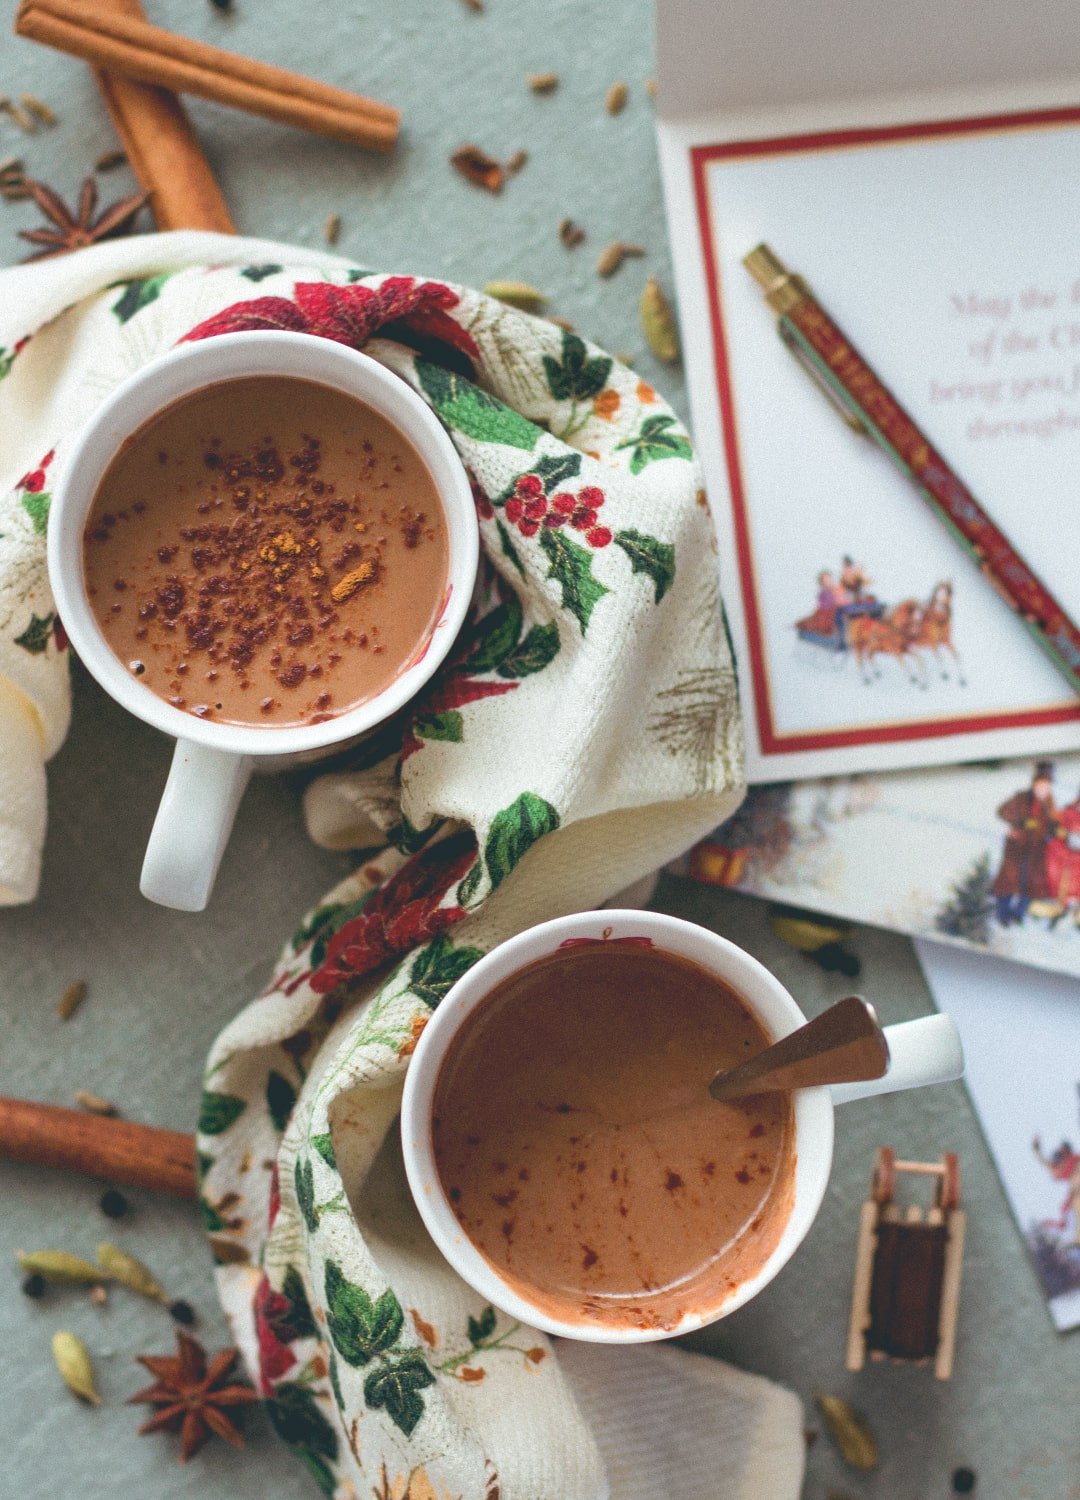 Almond Chai Hot Chocolate - incredibly creamy, delicious, and sweet. Almond milk, cacao, almond butter, tahini, homemade chai spice mix, sea salt, and maple syrup. So yummy! You'll love this hot chocolate, it's so easy to make. (vegan, GF) | thehealthfulideas.com